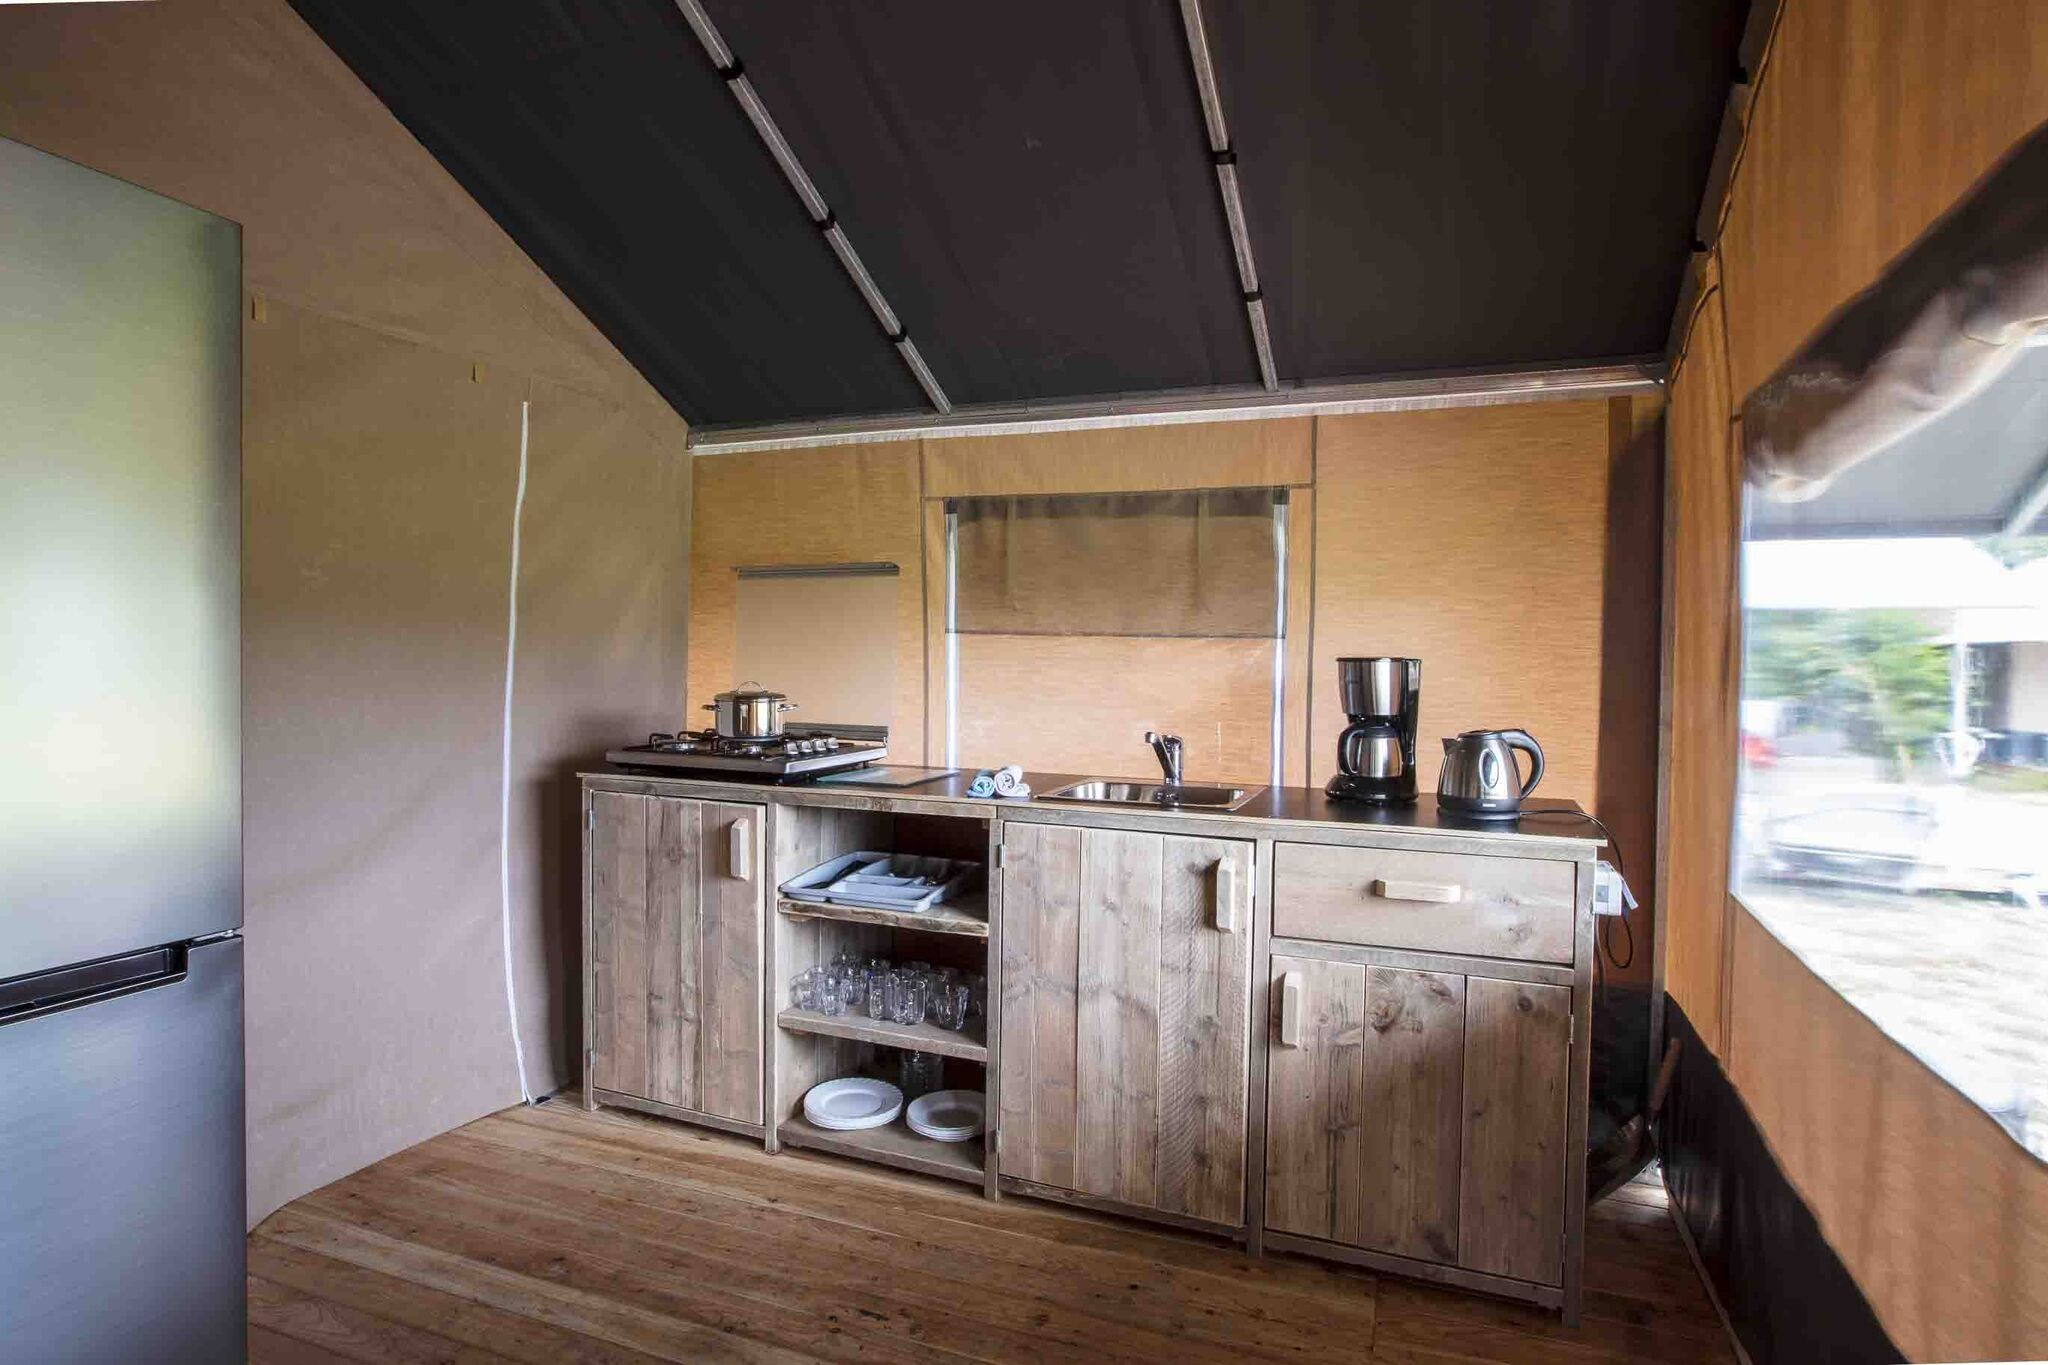 Safari tent with its own sanitary facilities